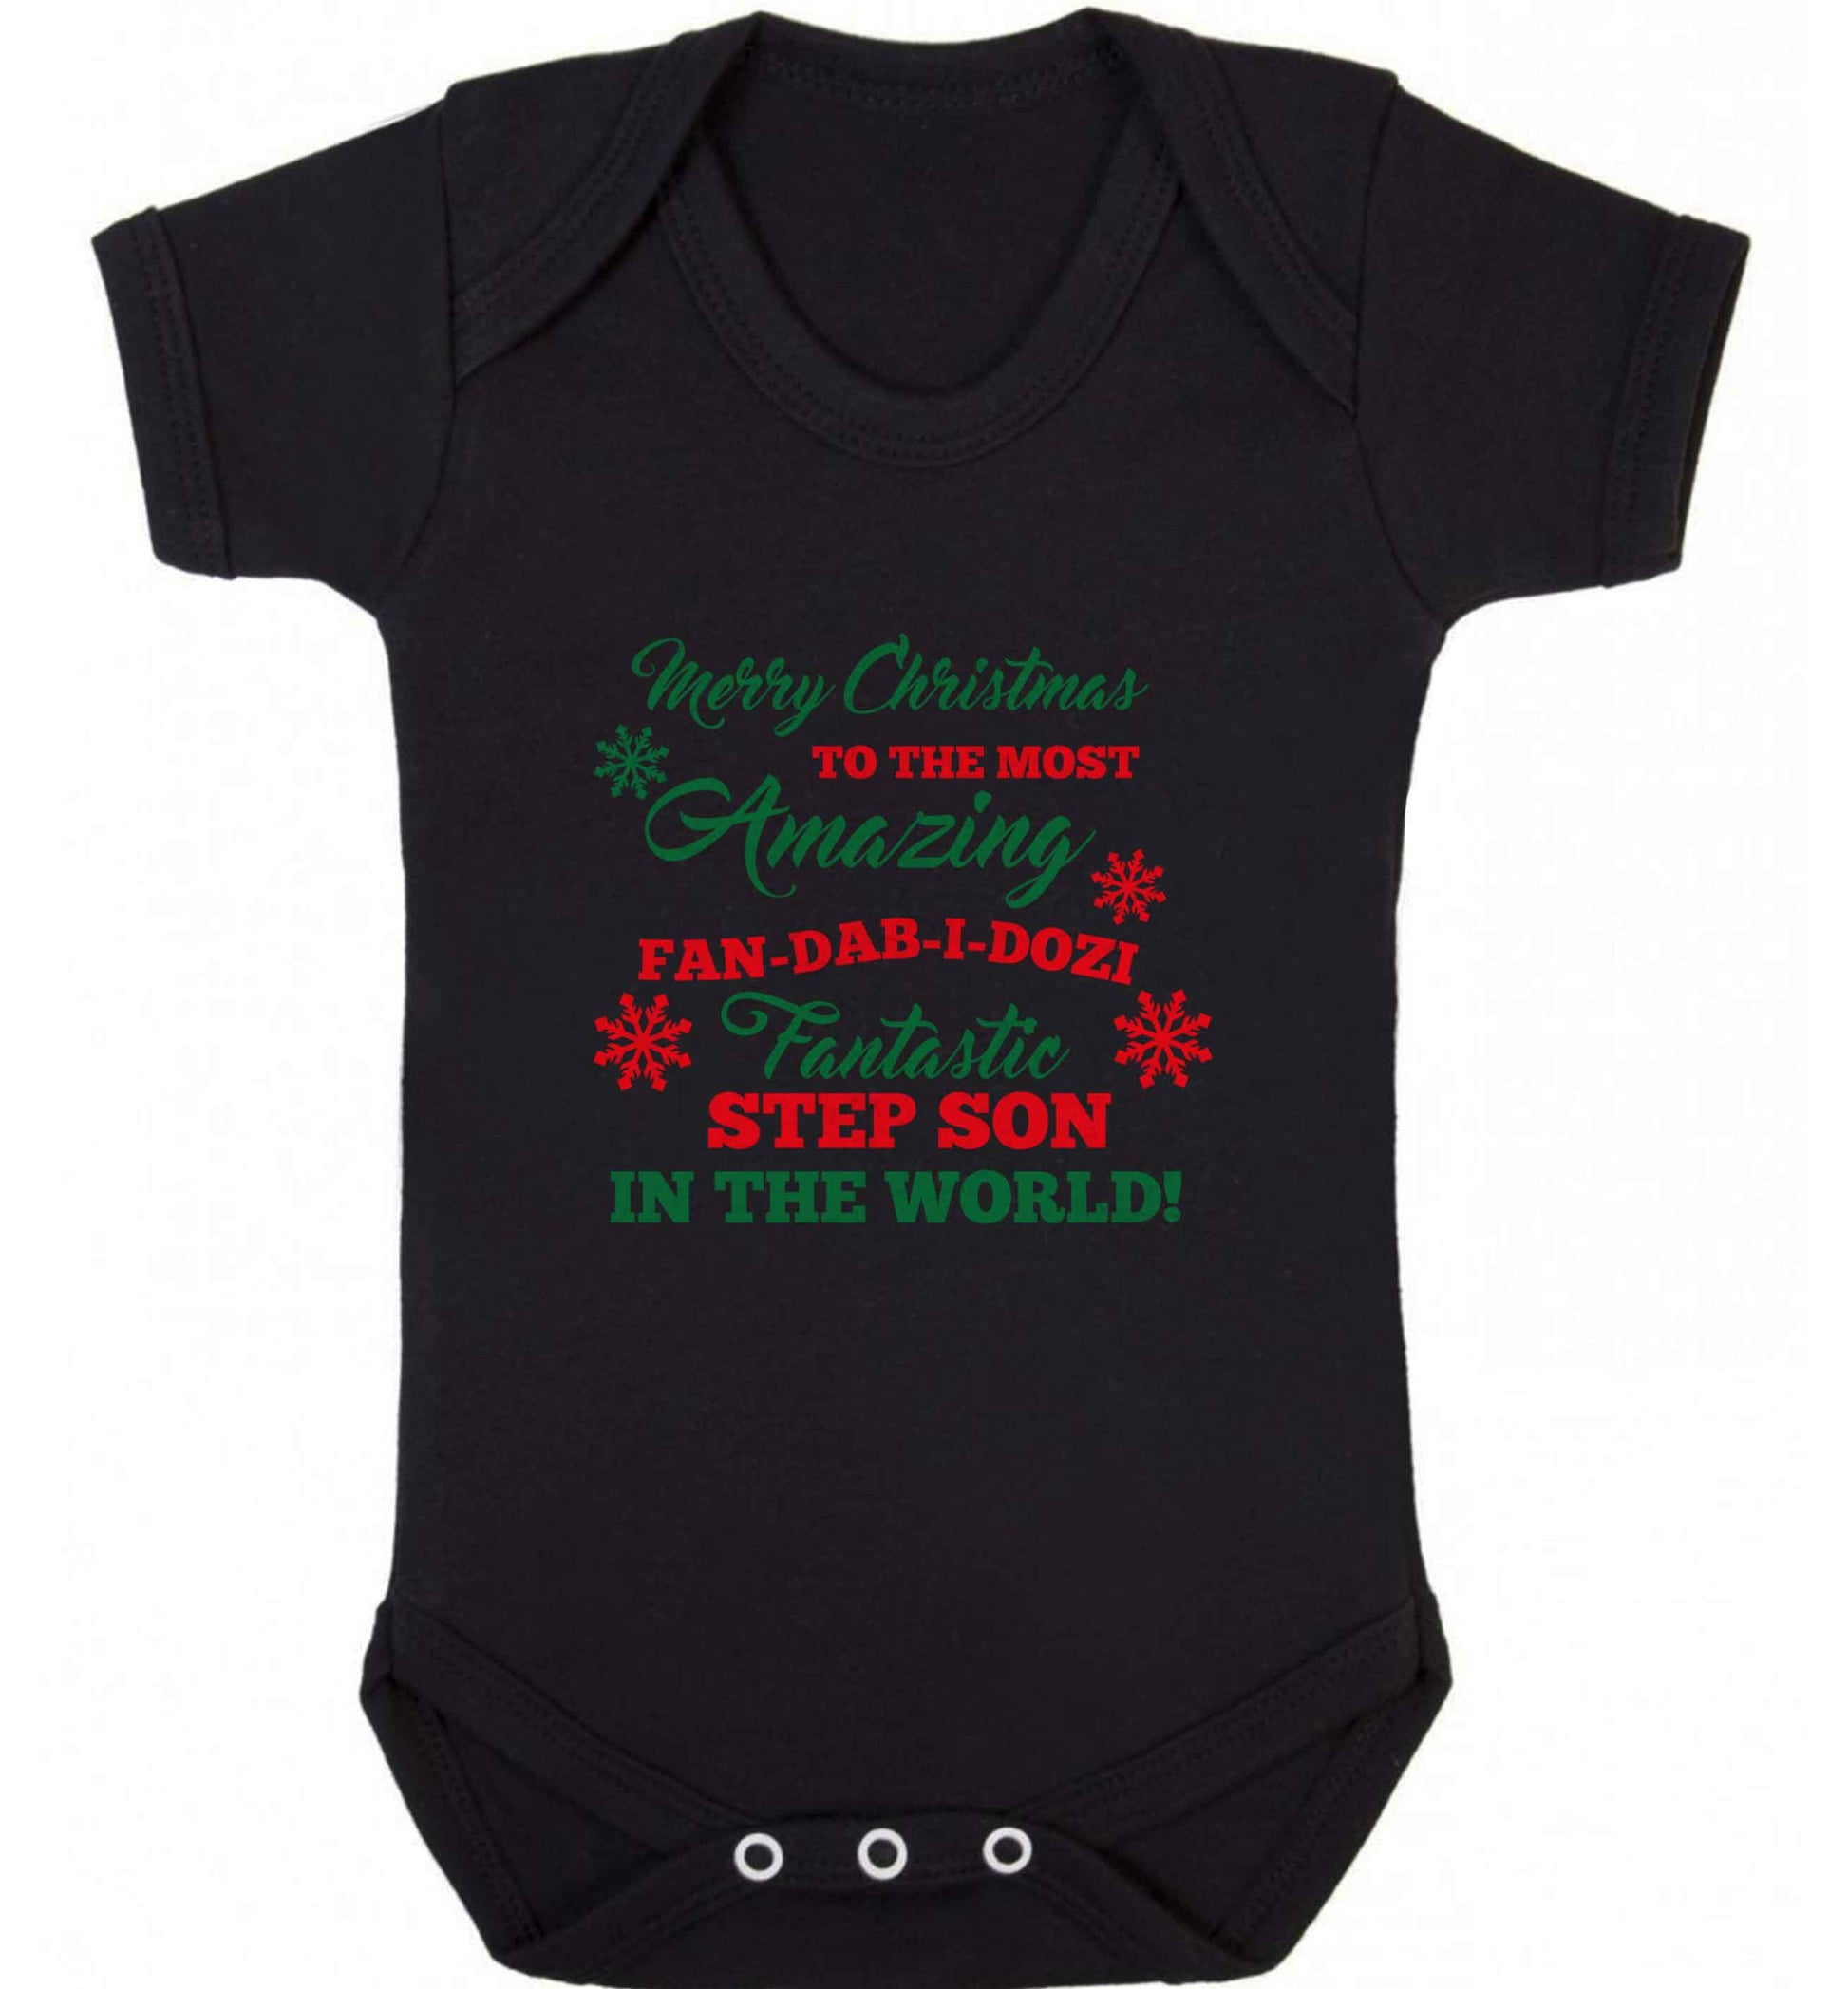 Merry Christmas to the most amazing fan-dab-i-dozi fantasic Step Son in the world baby vest black 18-24 months